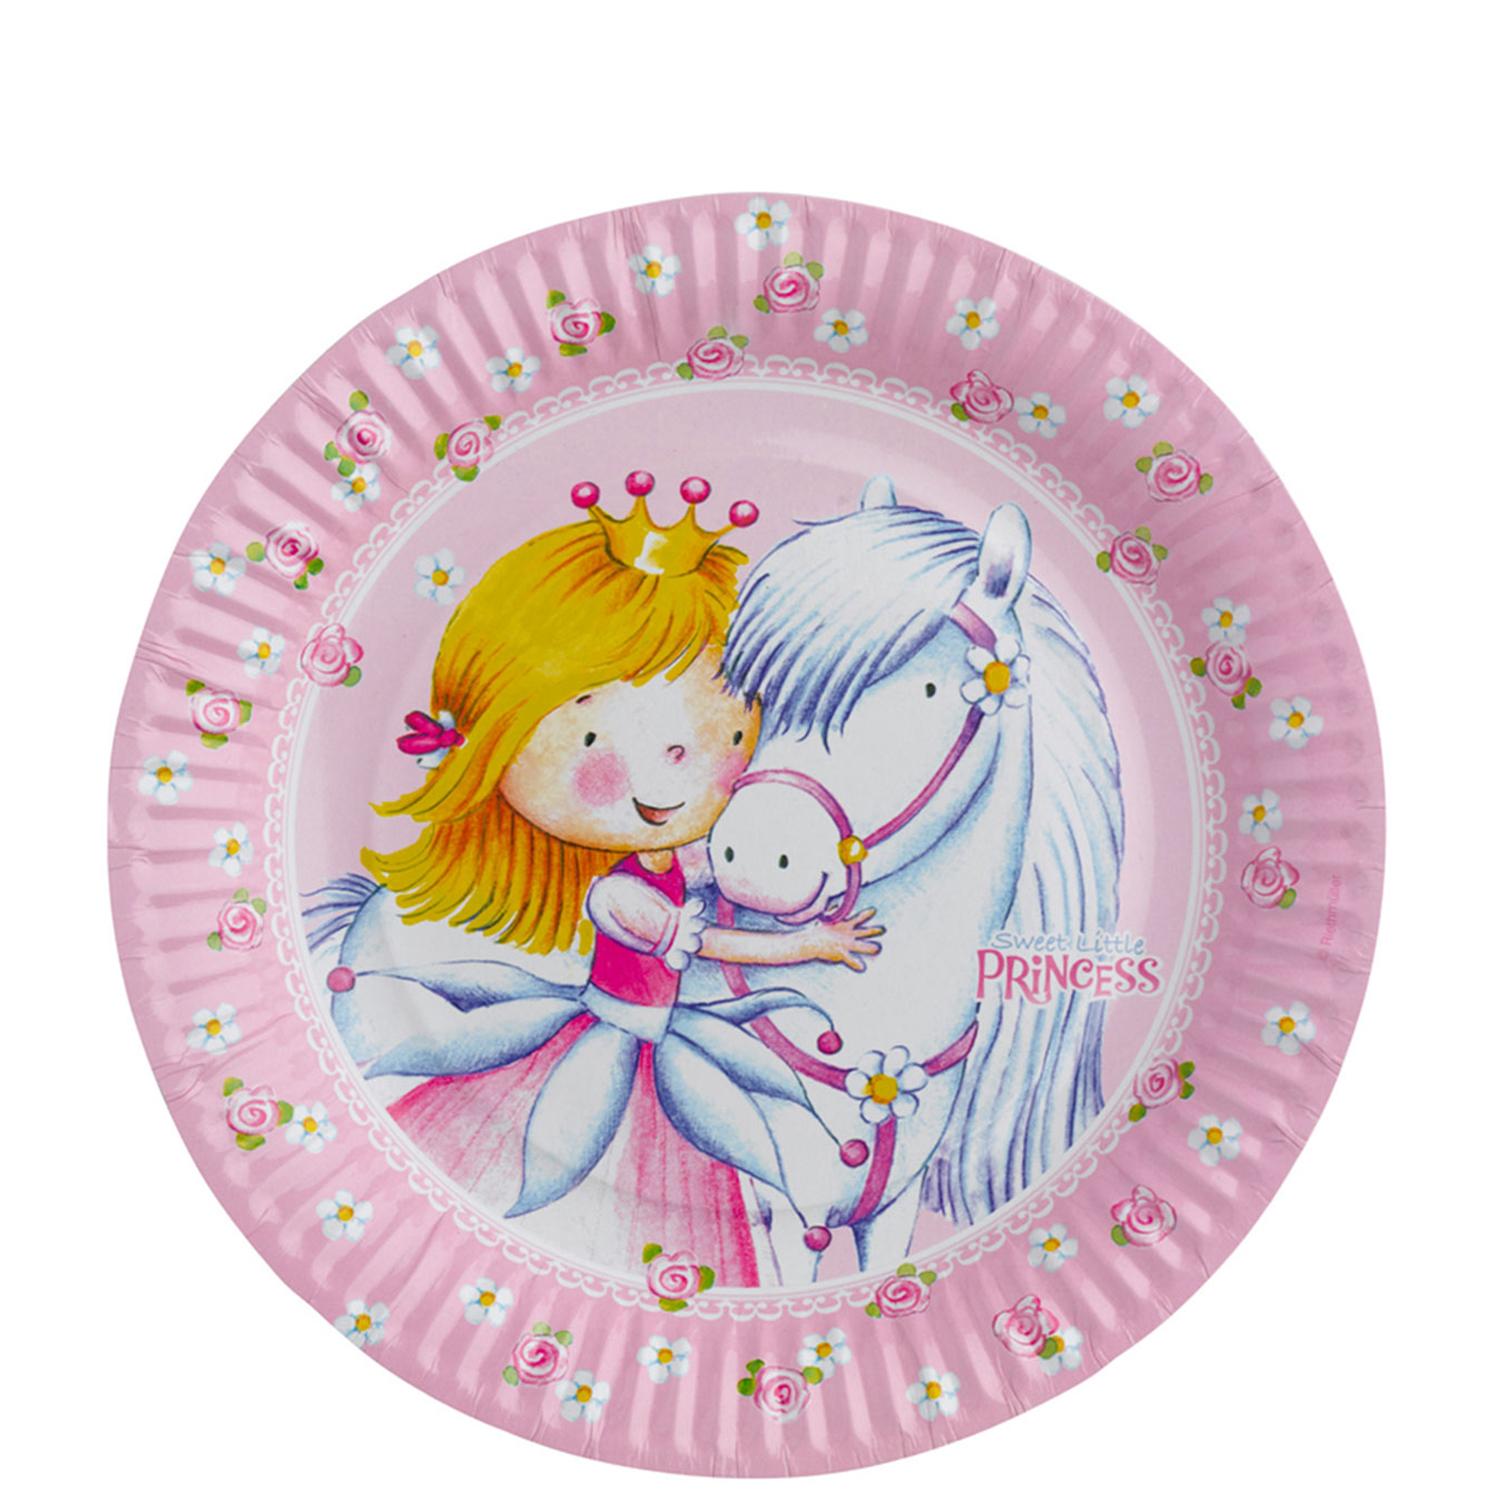 Sweet Little Princess Dinner Plates 8pcs Printed Tableware - Party Centre